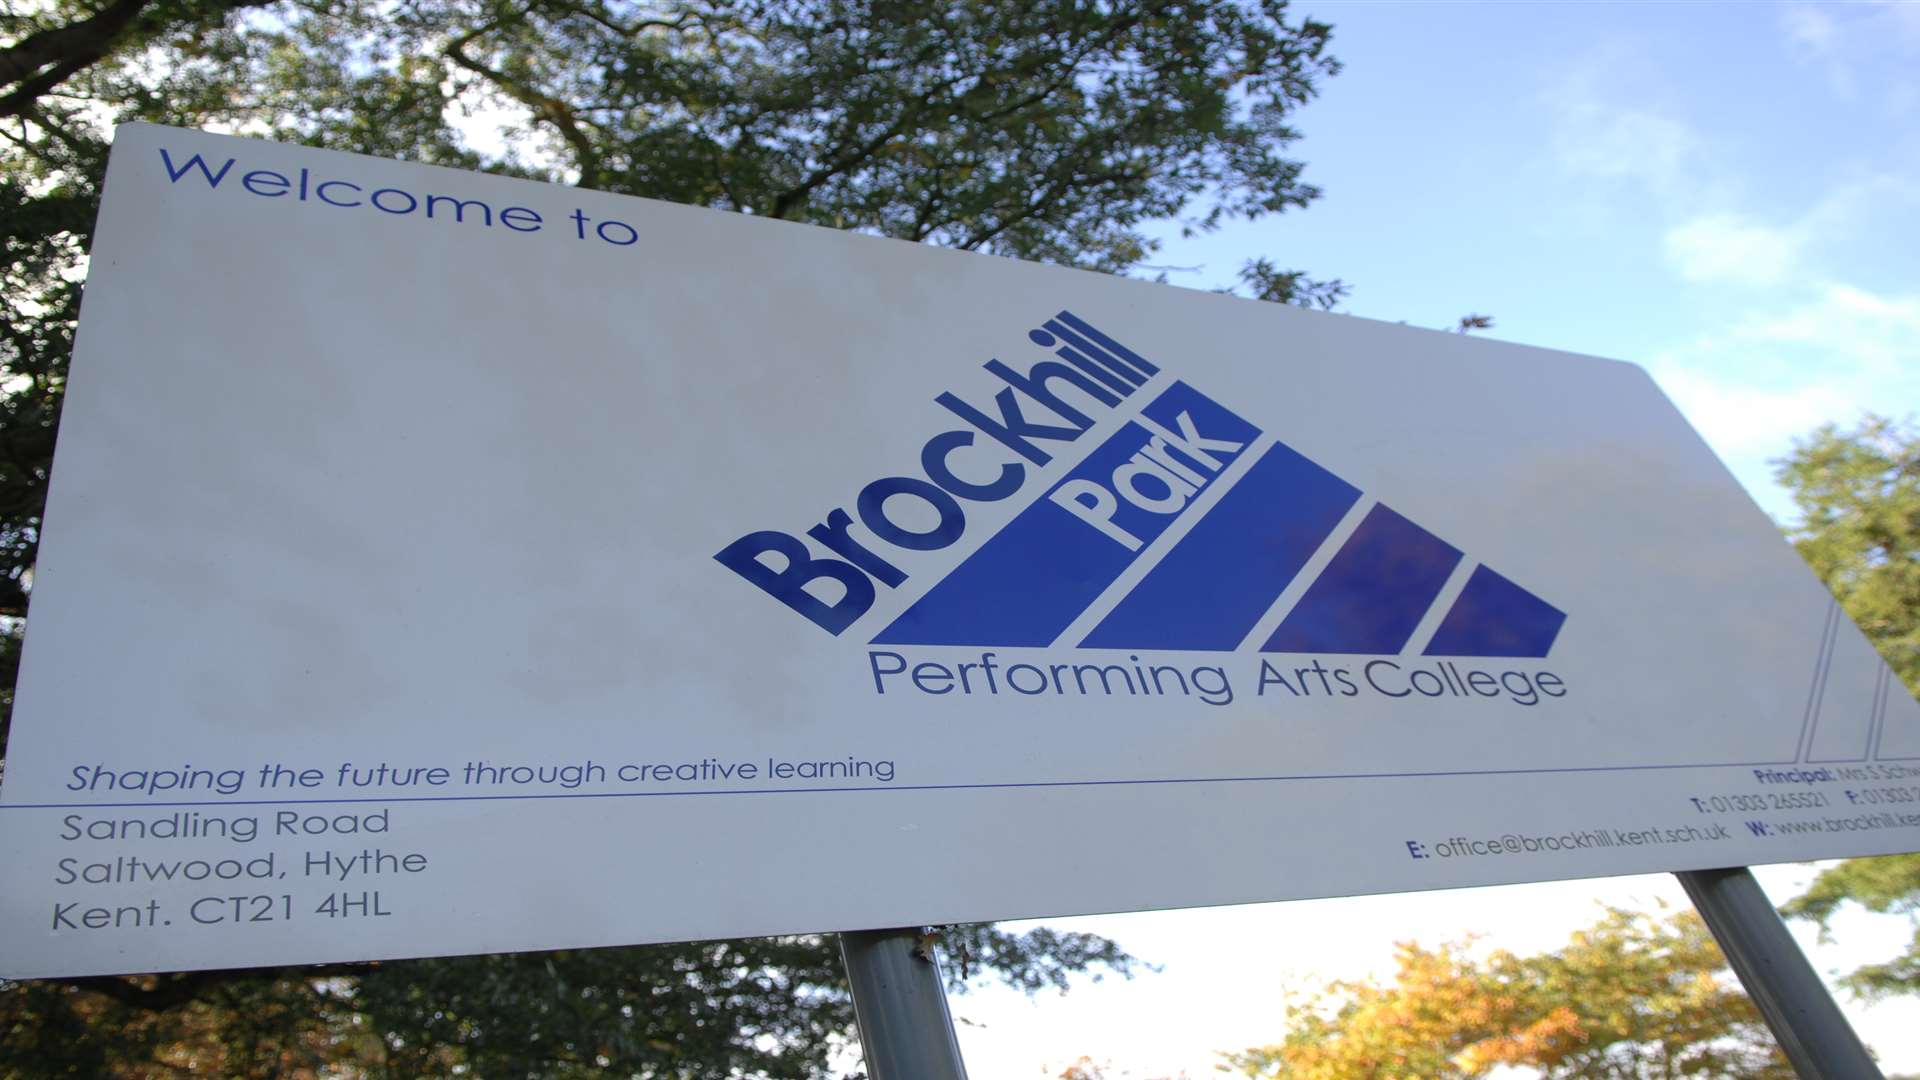 Brockhill Park Performing Arts College